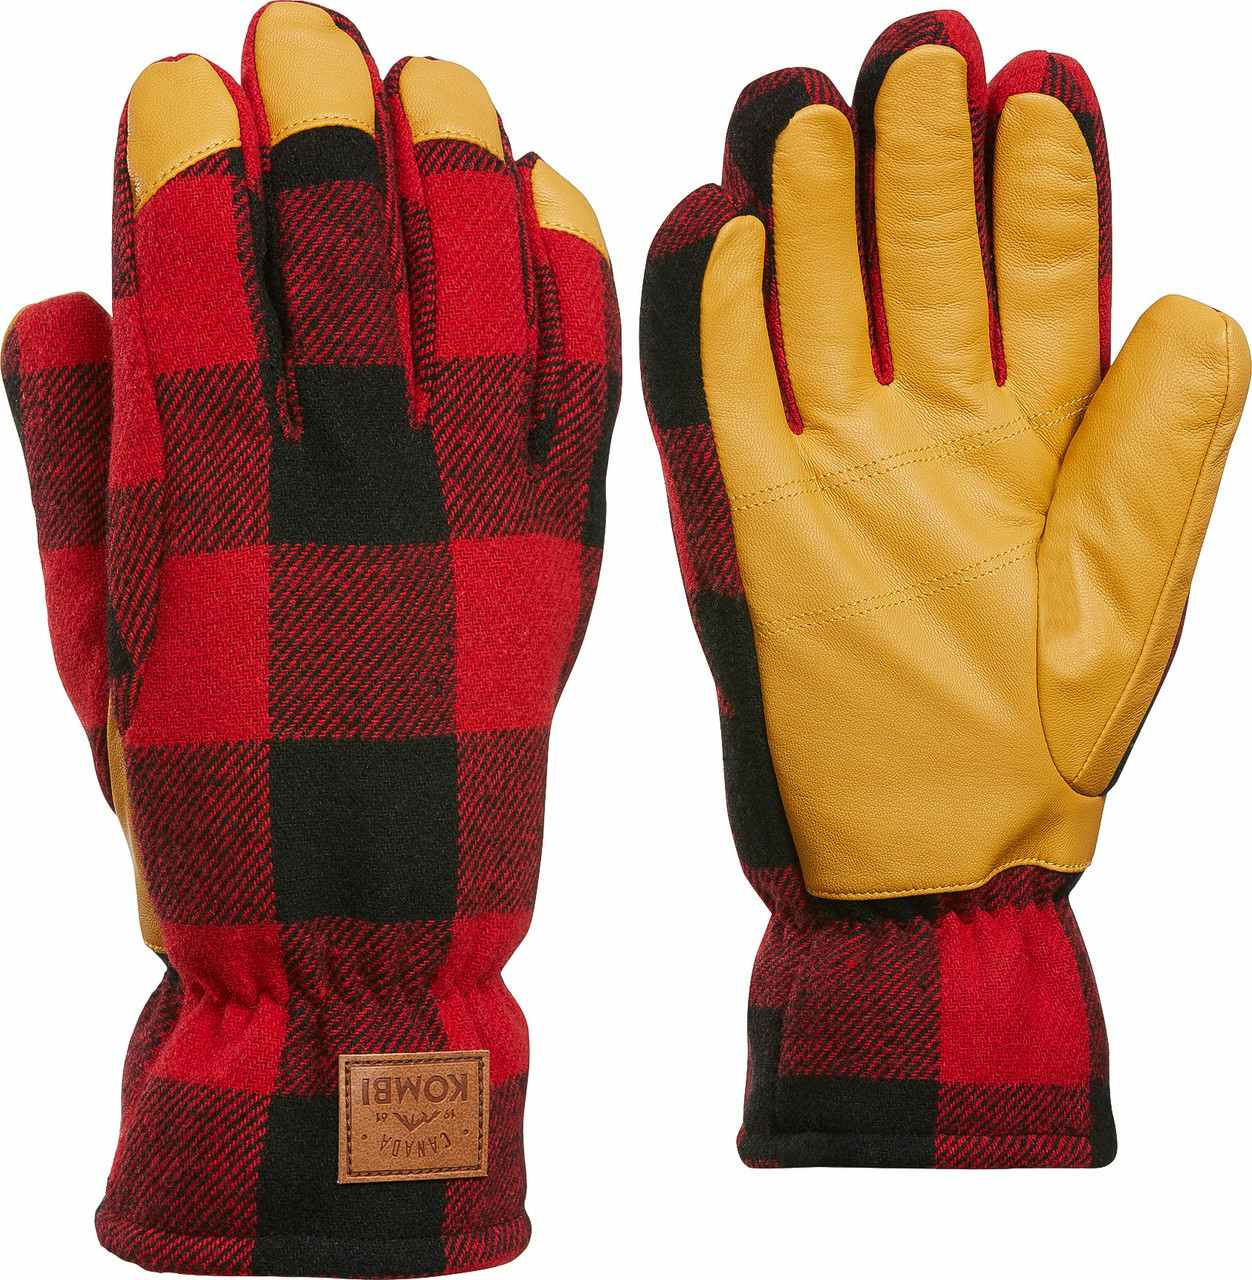 The Timber Gloves Red Buffalo Plaid